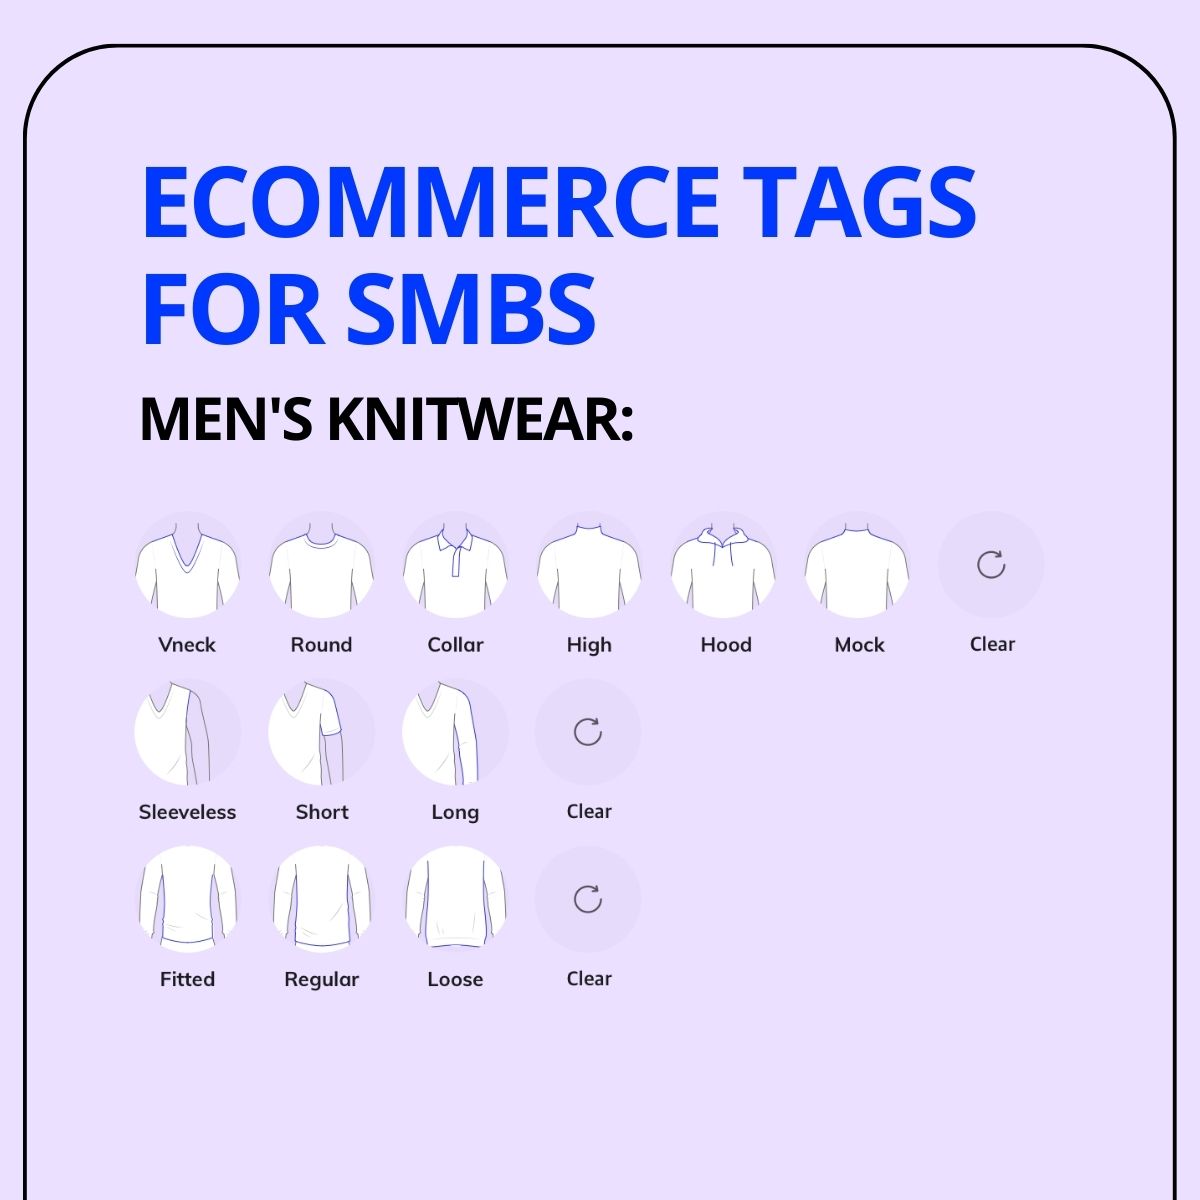 Ecommerce tags for mens knitwear using fashion AI